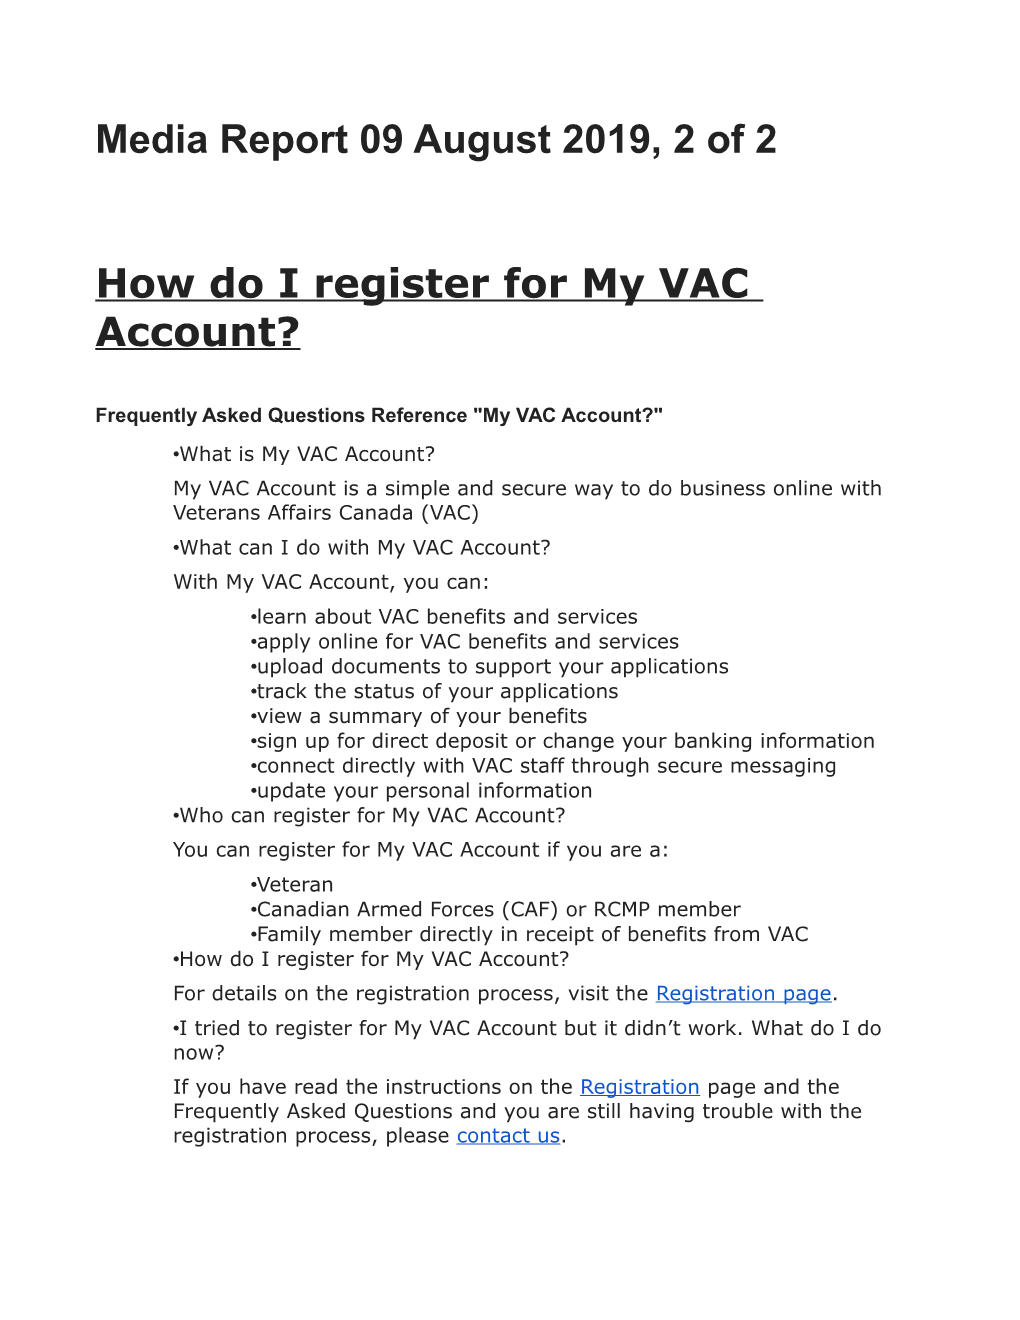 Media Report 09 August 2019, 2 of 2 How Do I Register for My VAC